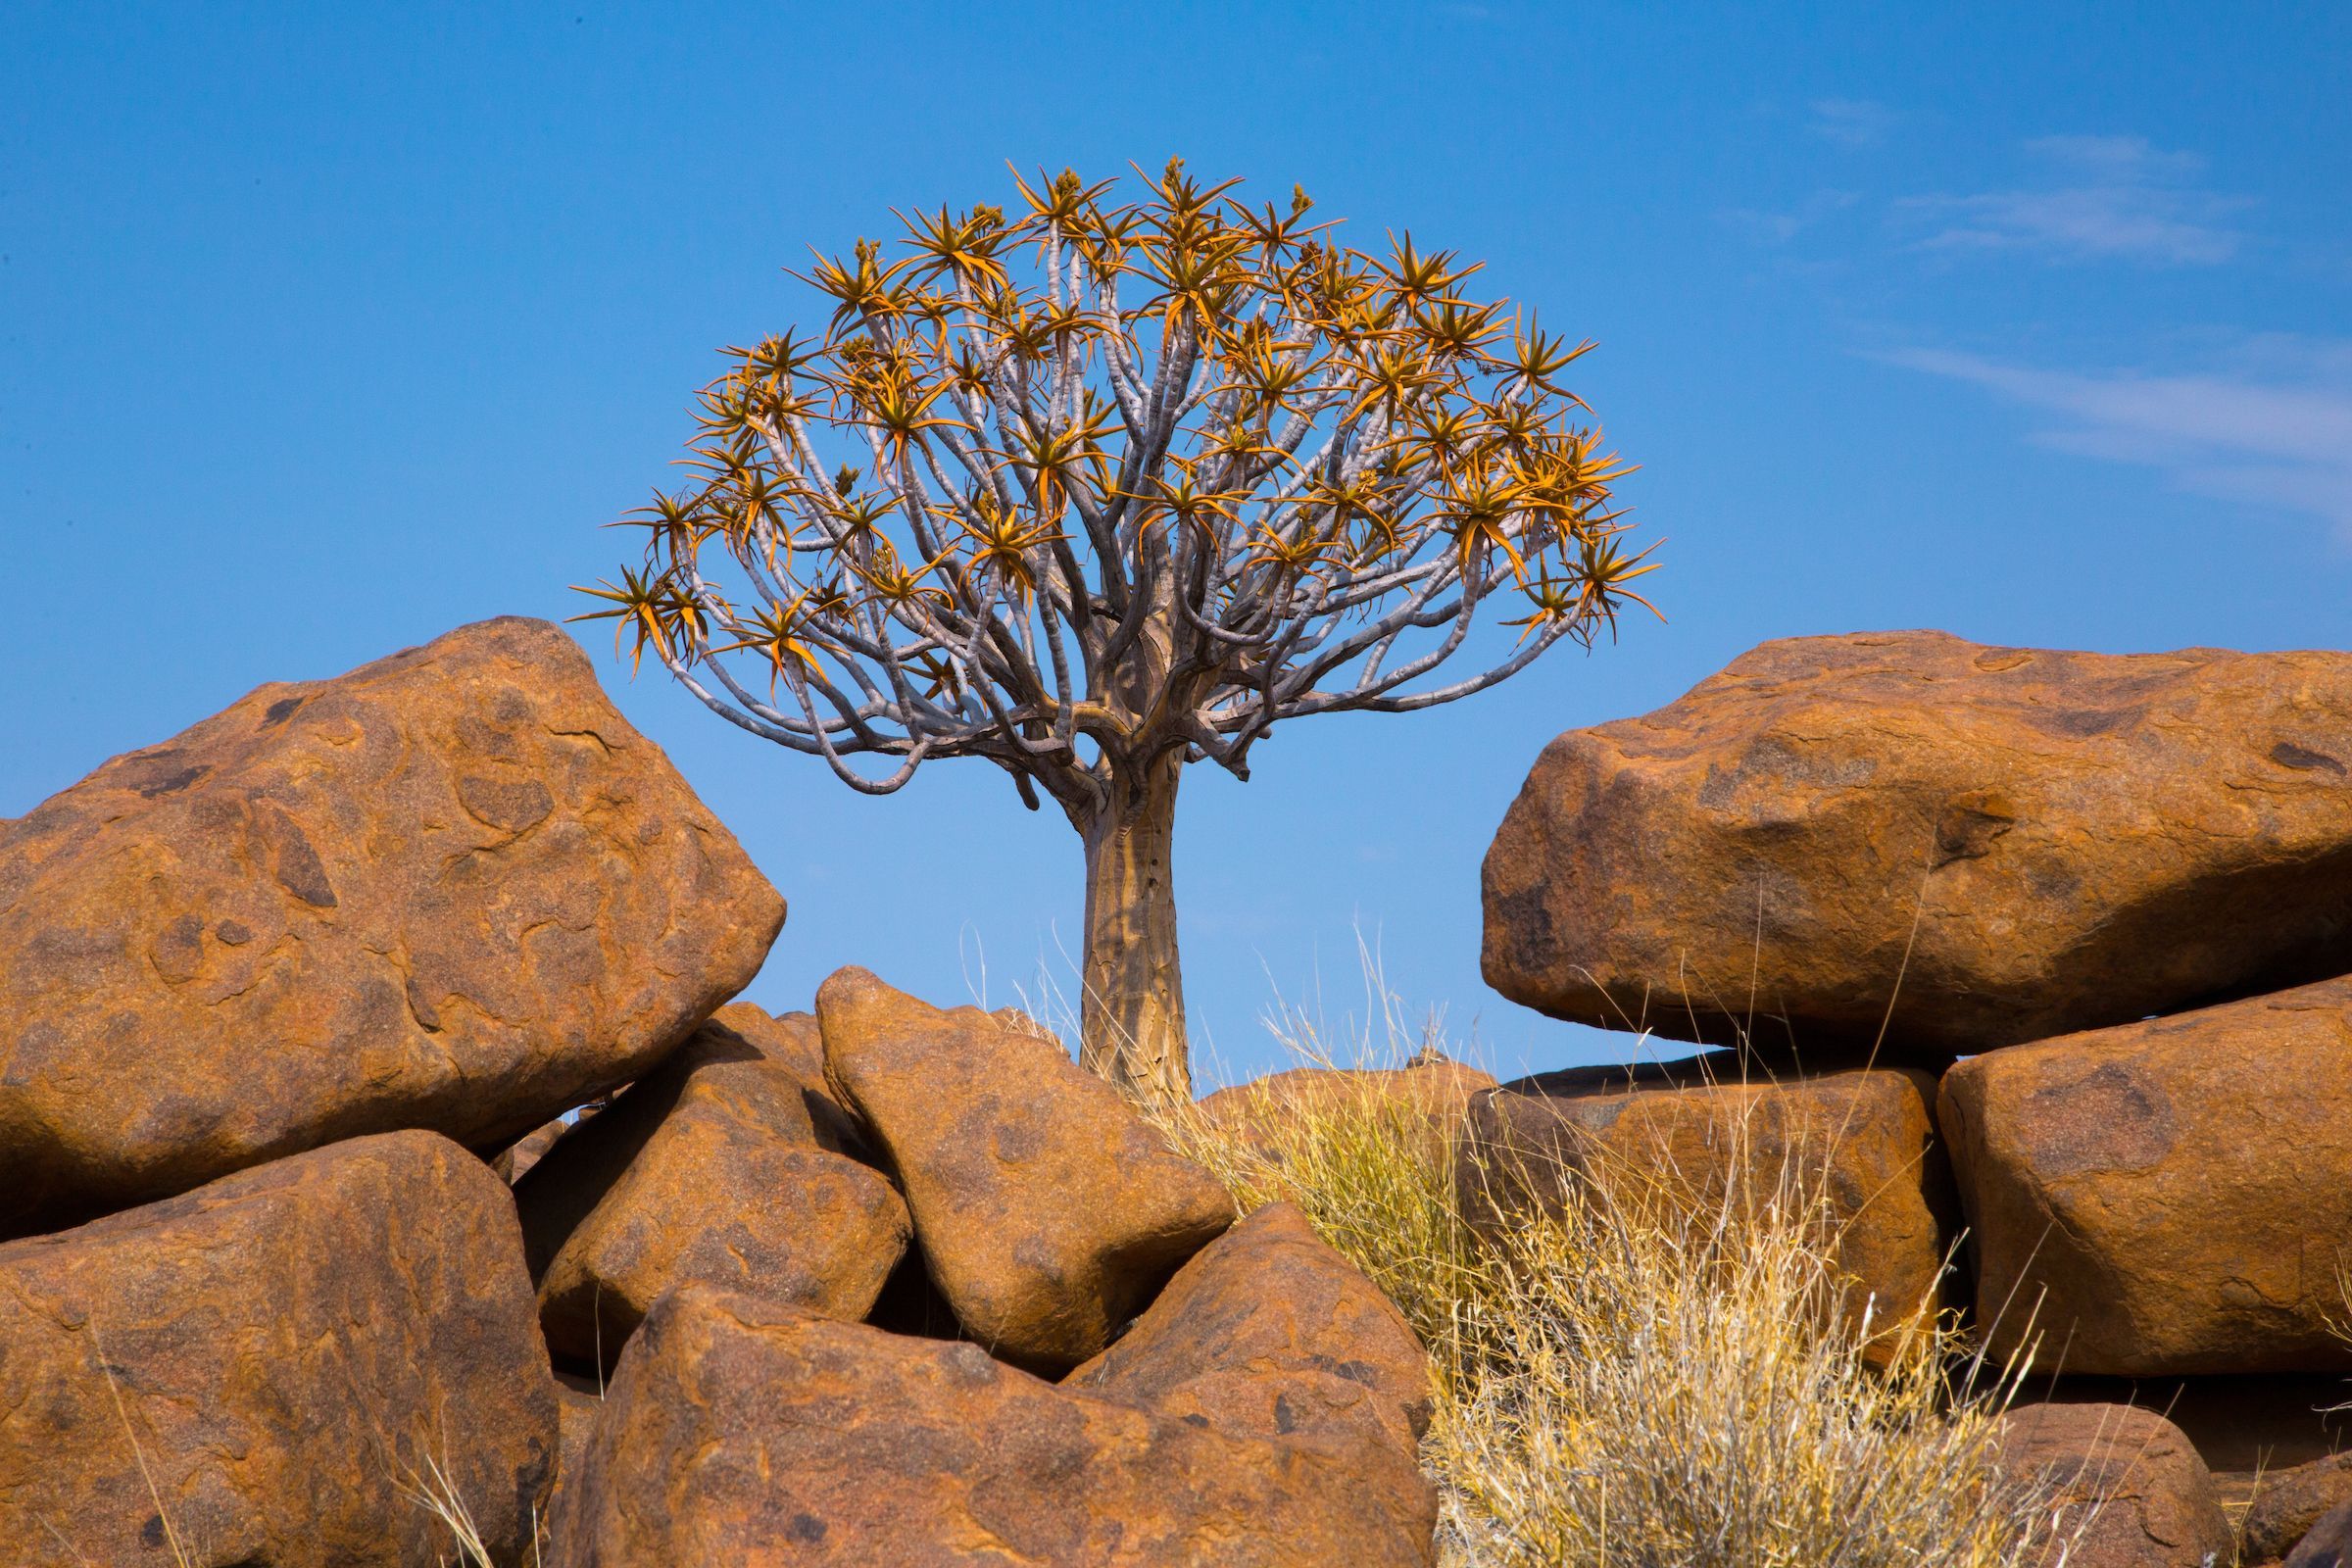 Quiver Tree in the Giant's Playground at Keetmanshoop, Namibia